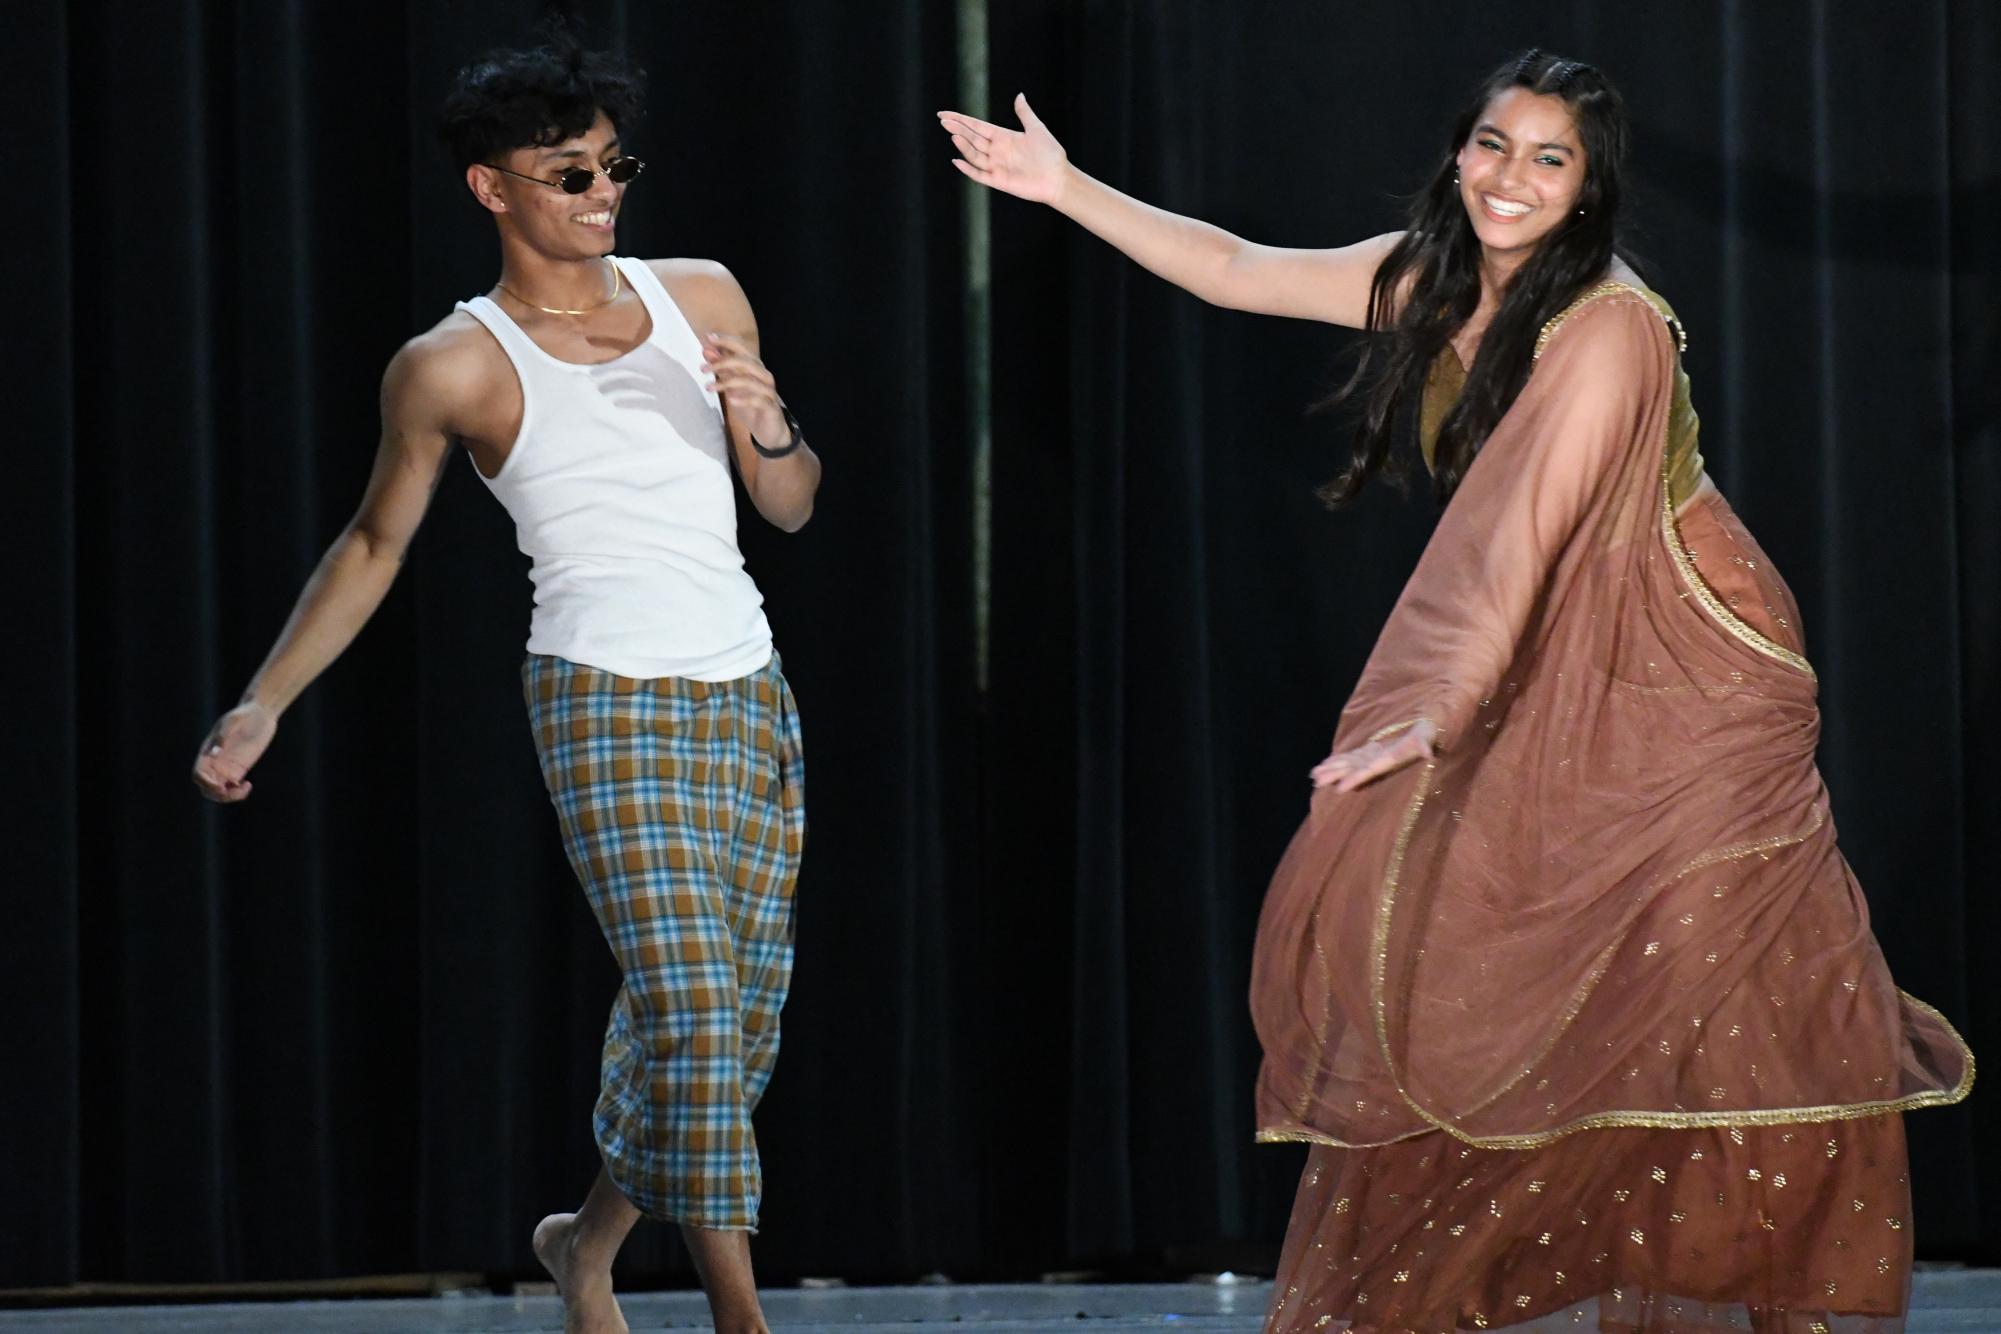 Amador+Valley+Dhamaka+hosts+its+Second+Annual+Isvara+Showcase+for+Bollywood+Dance+Teams+across+the+Bay+Area